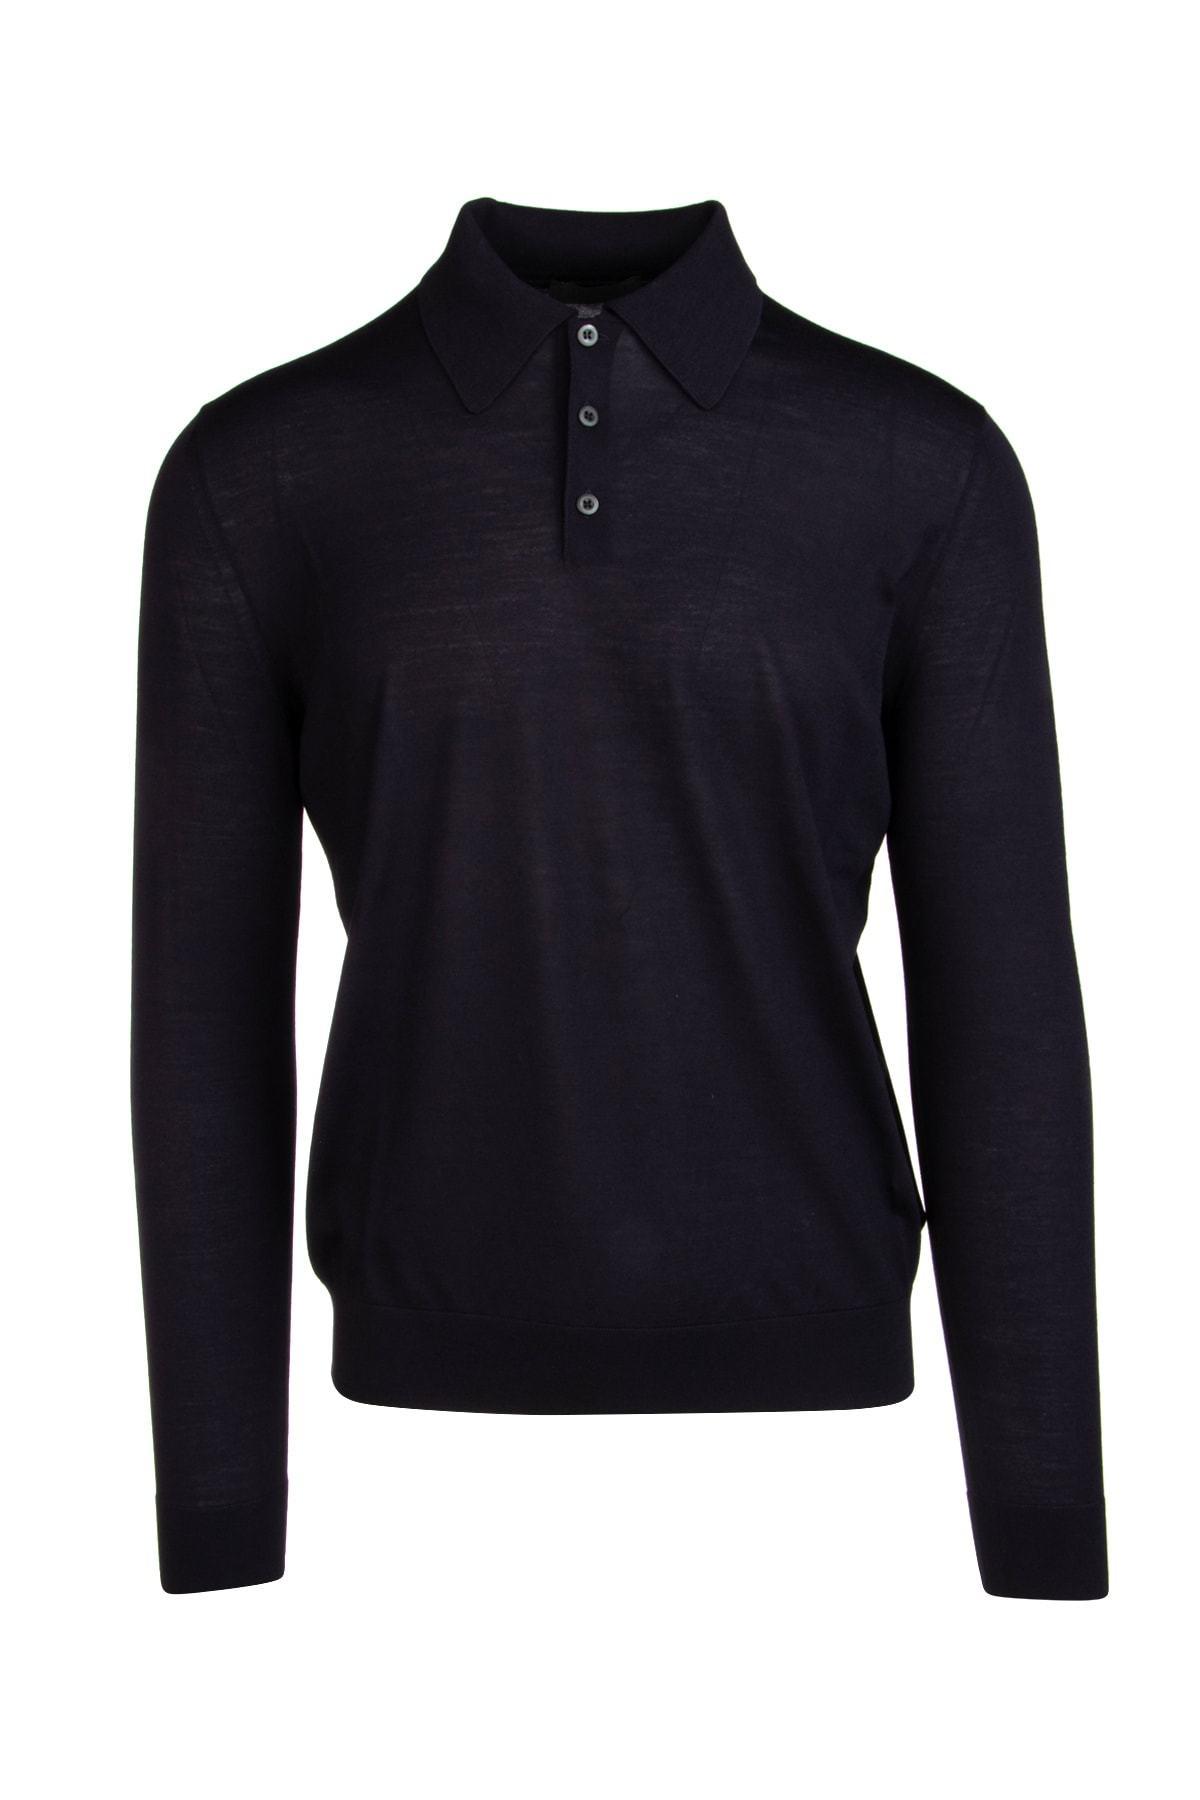 Prada Wool Knitted Polo Shirt in Blue for Men - Lyst